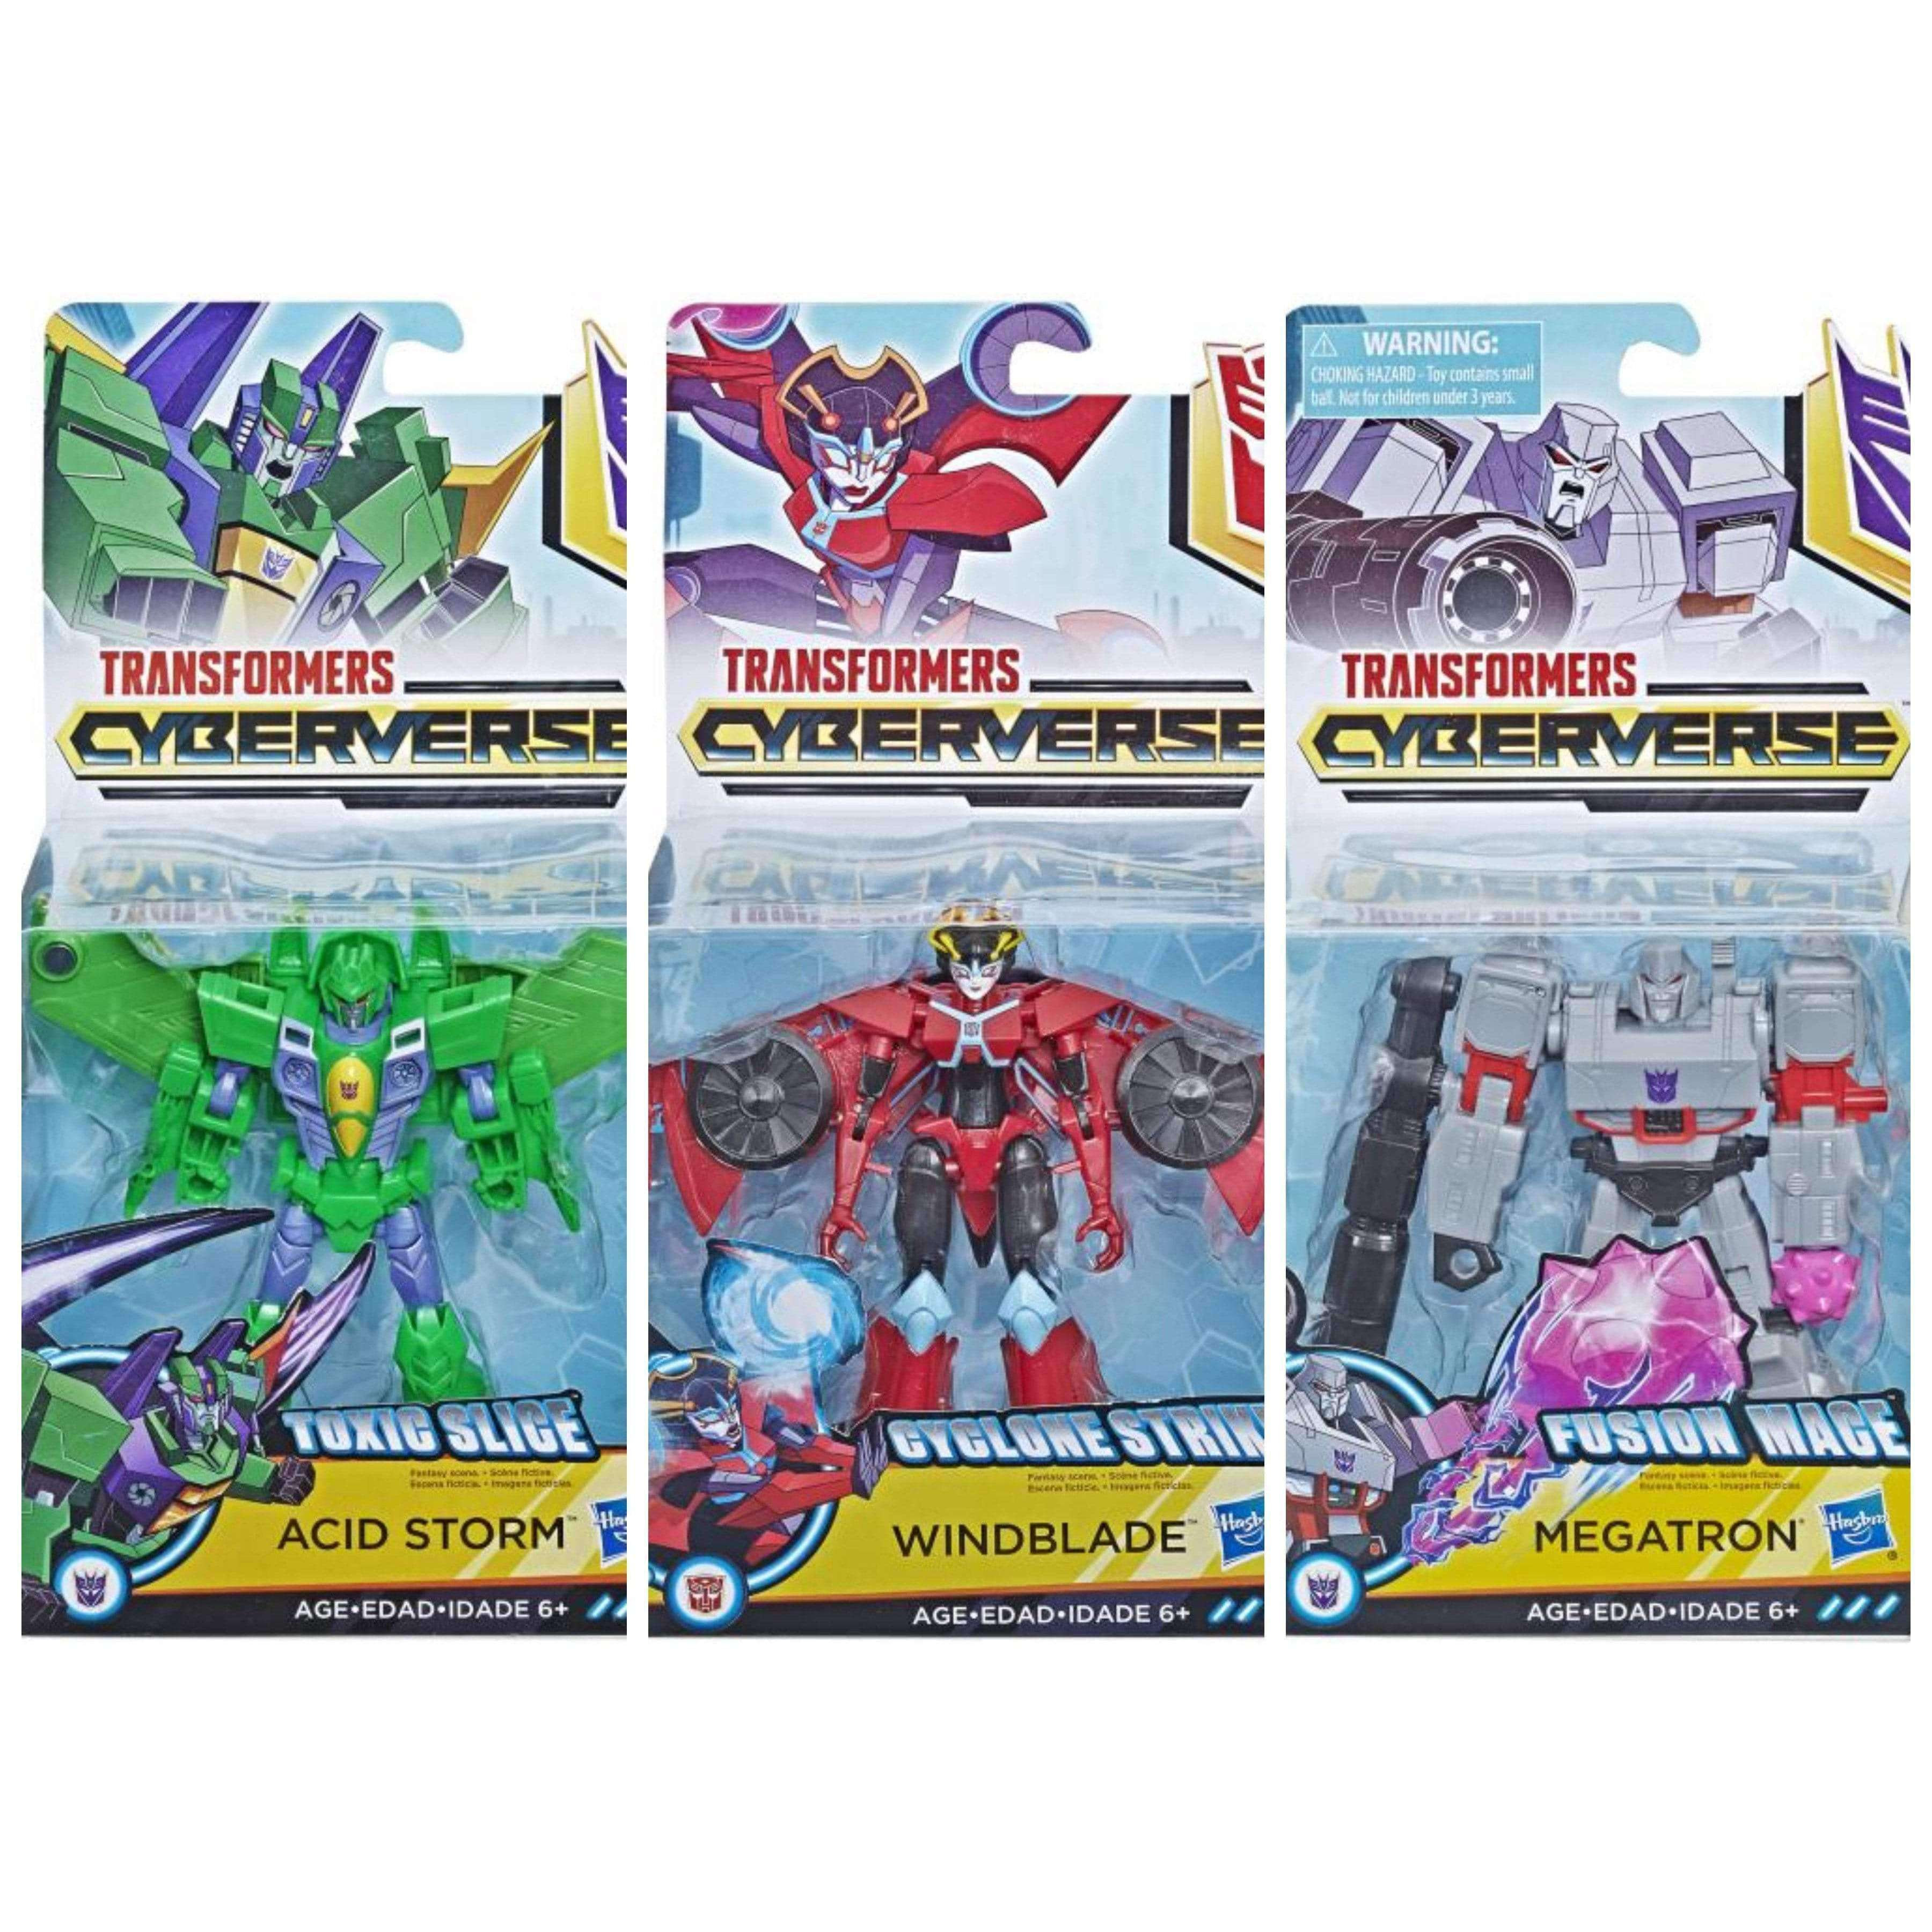 Image of Transformers: Cyberverse Warrior Wave 2 Set of 3 Figures